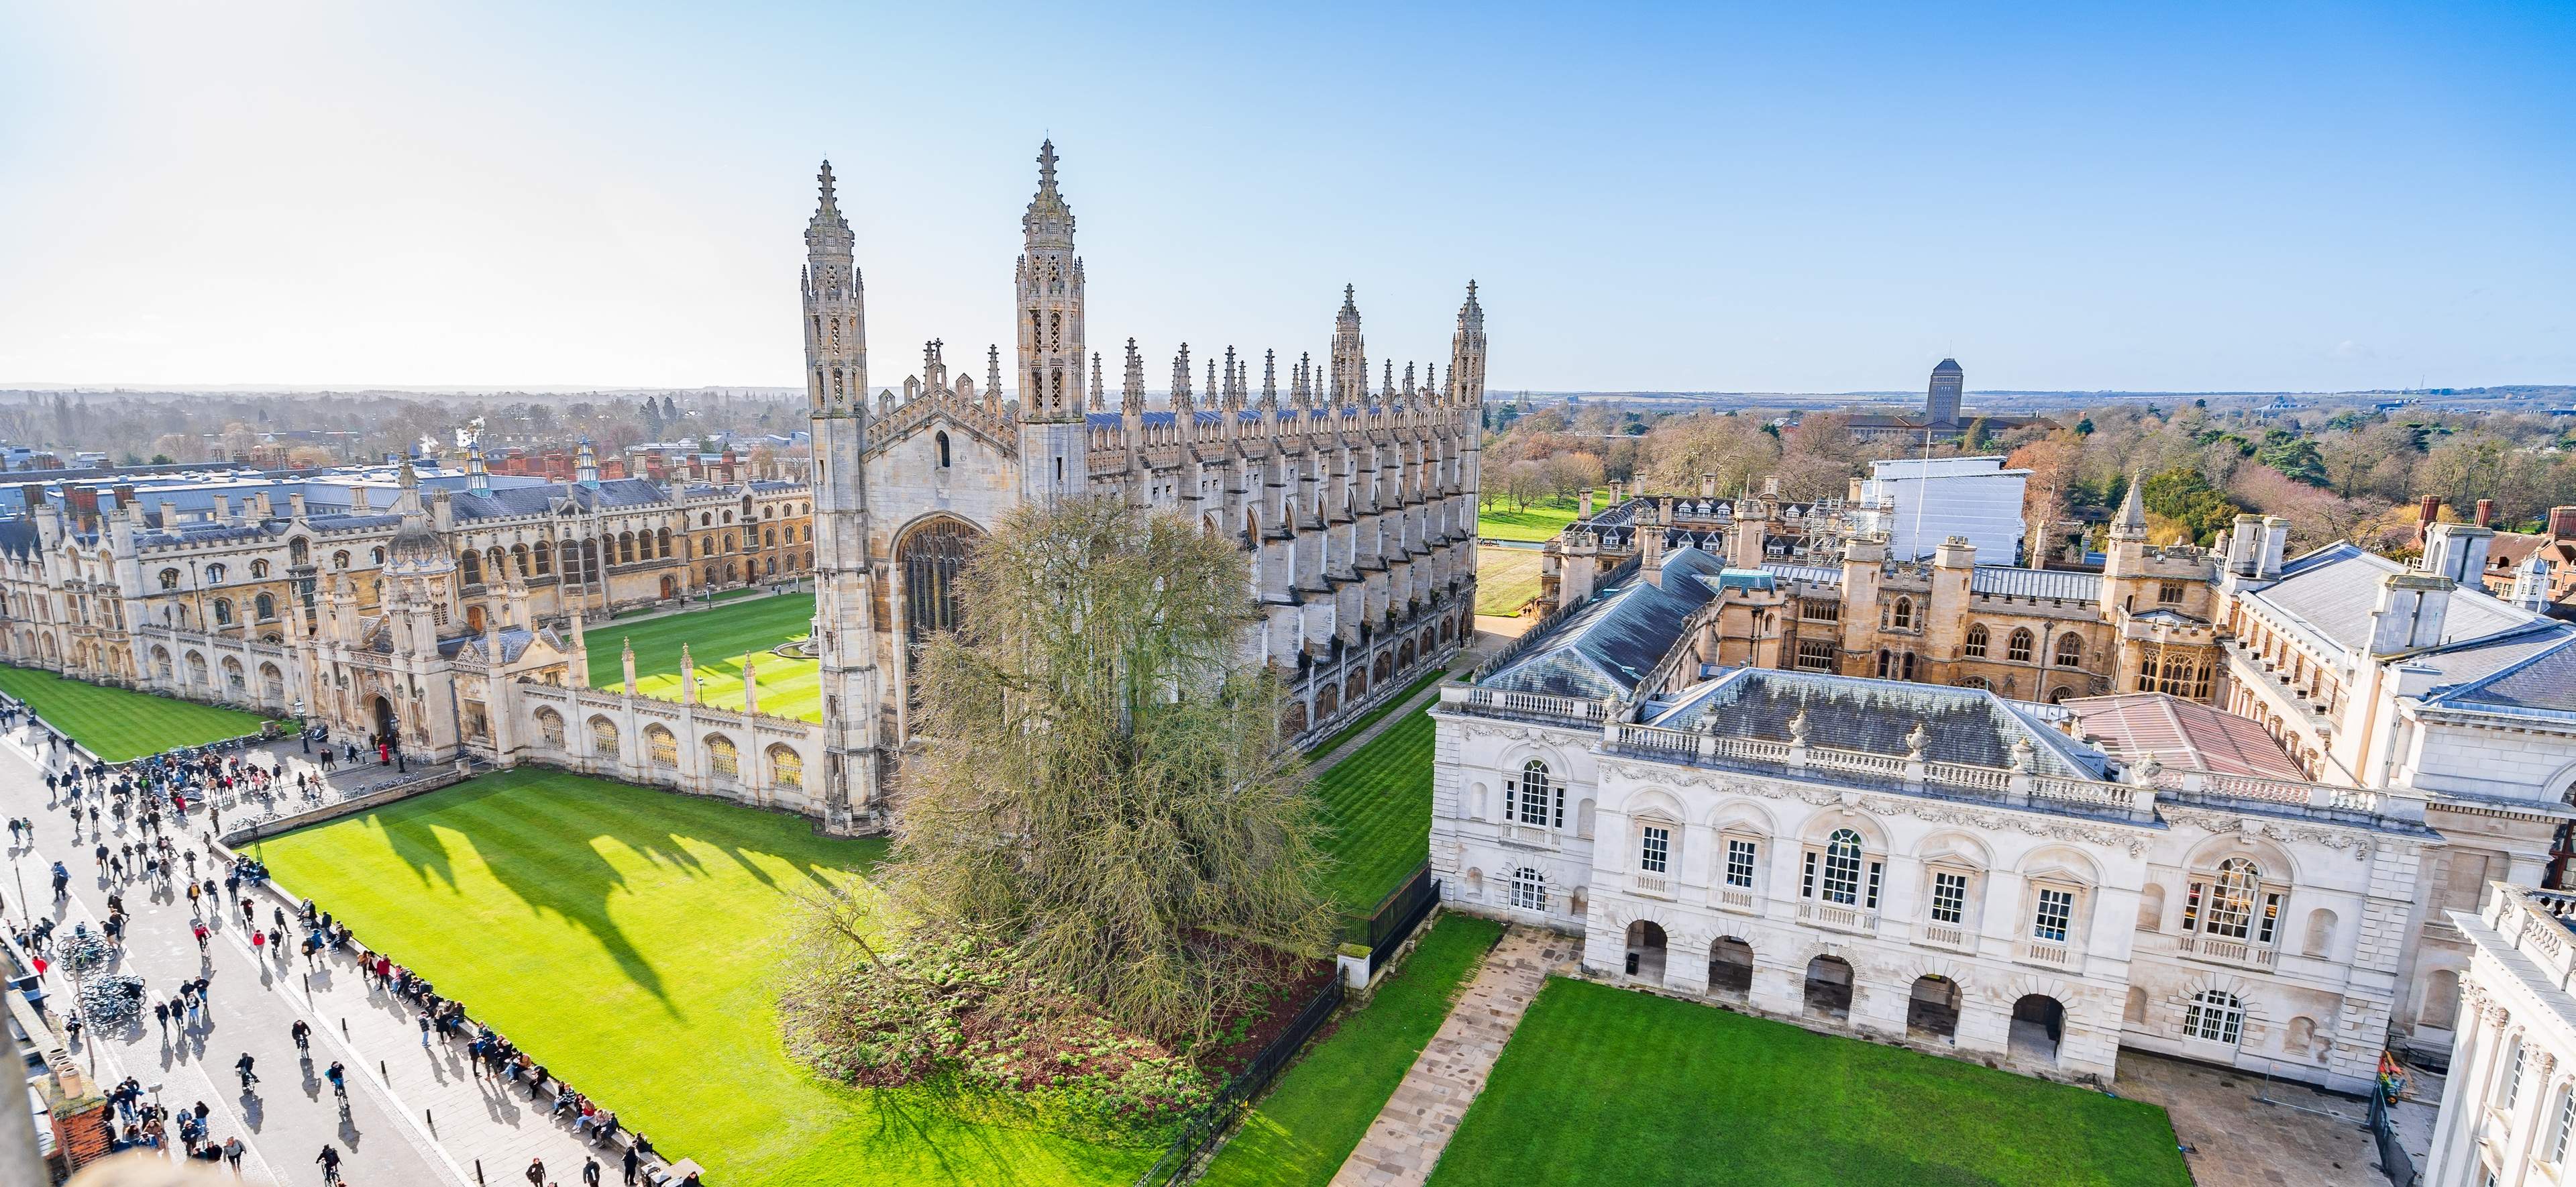 View on King's College Chapel from the Church of St Mary the Great, Cambridge, UK